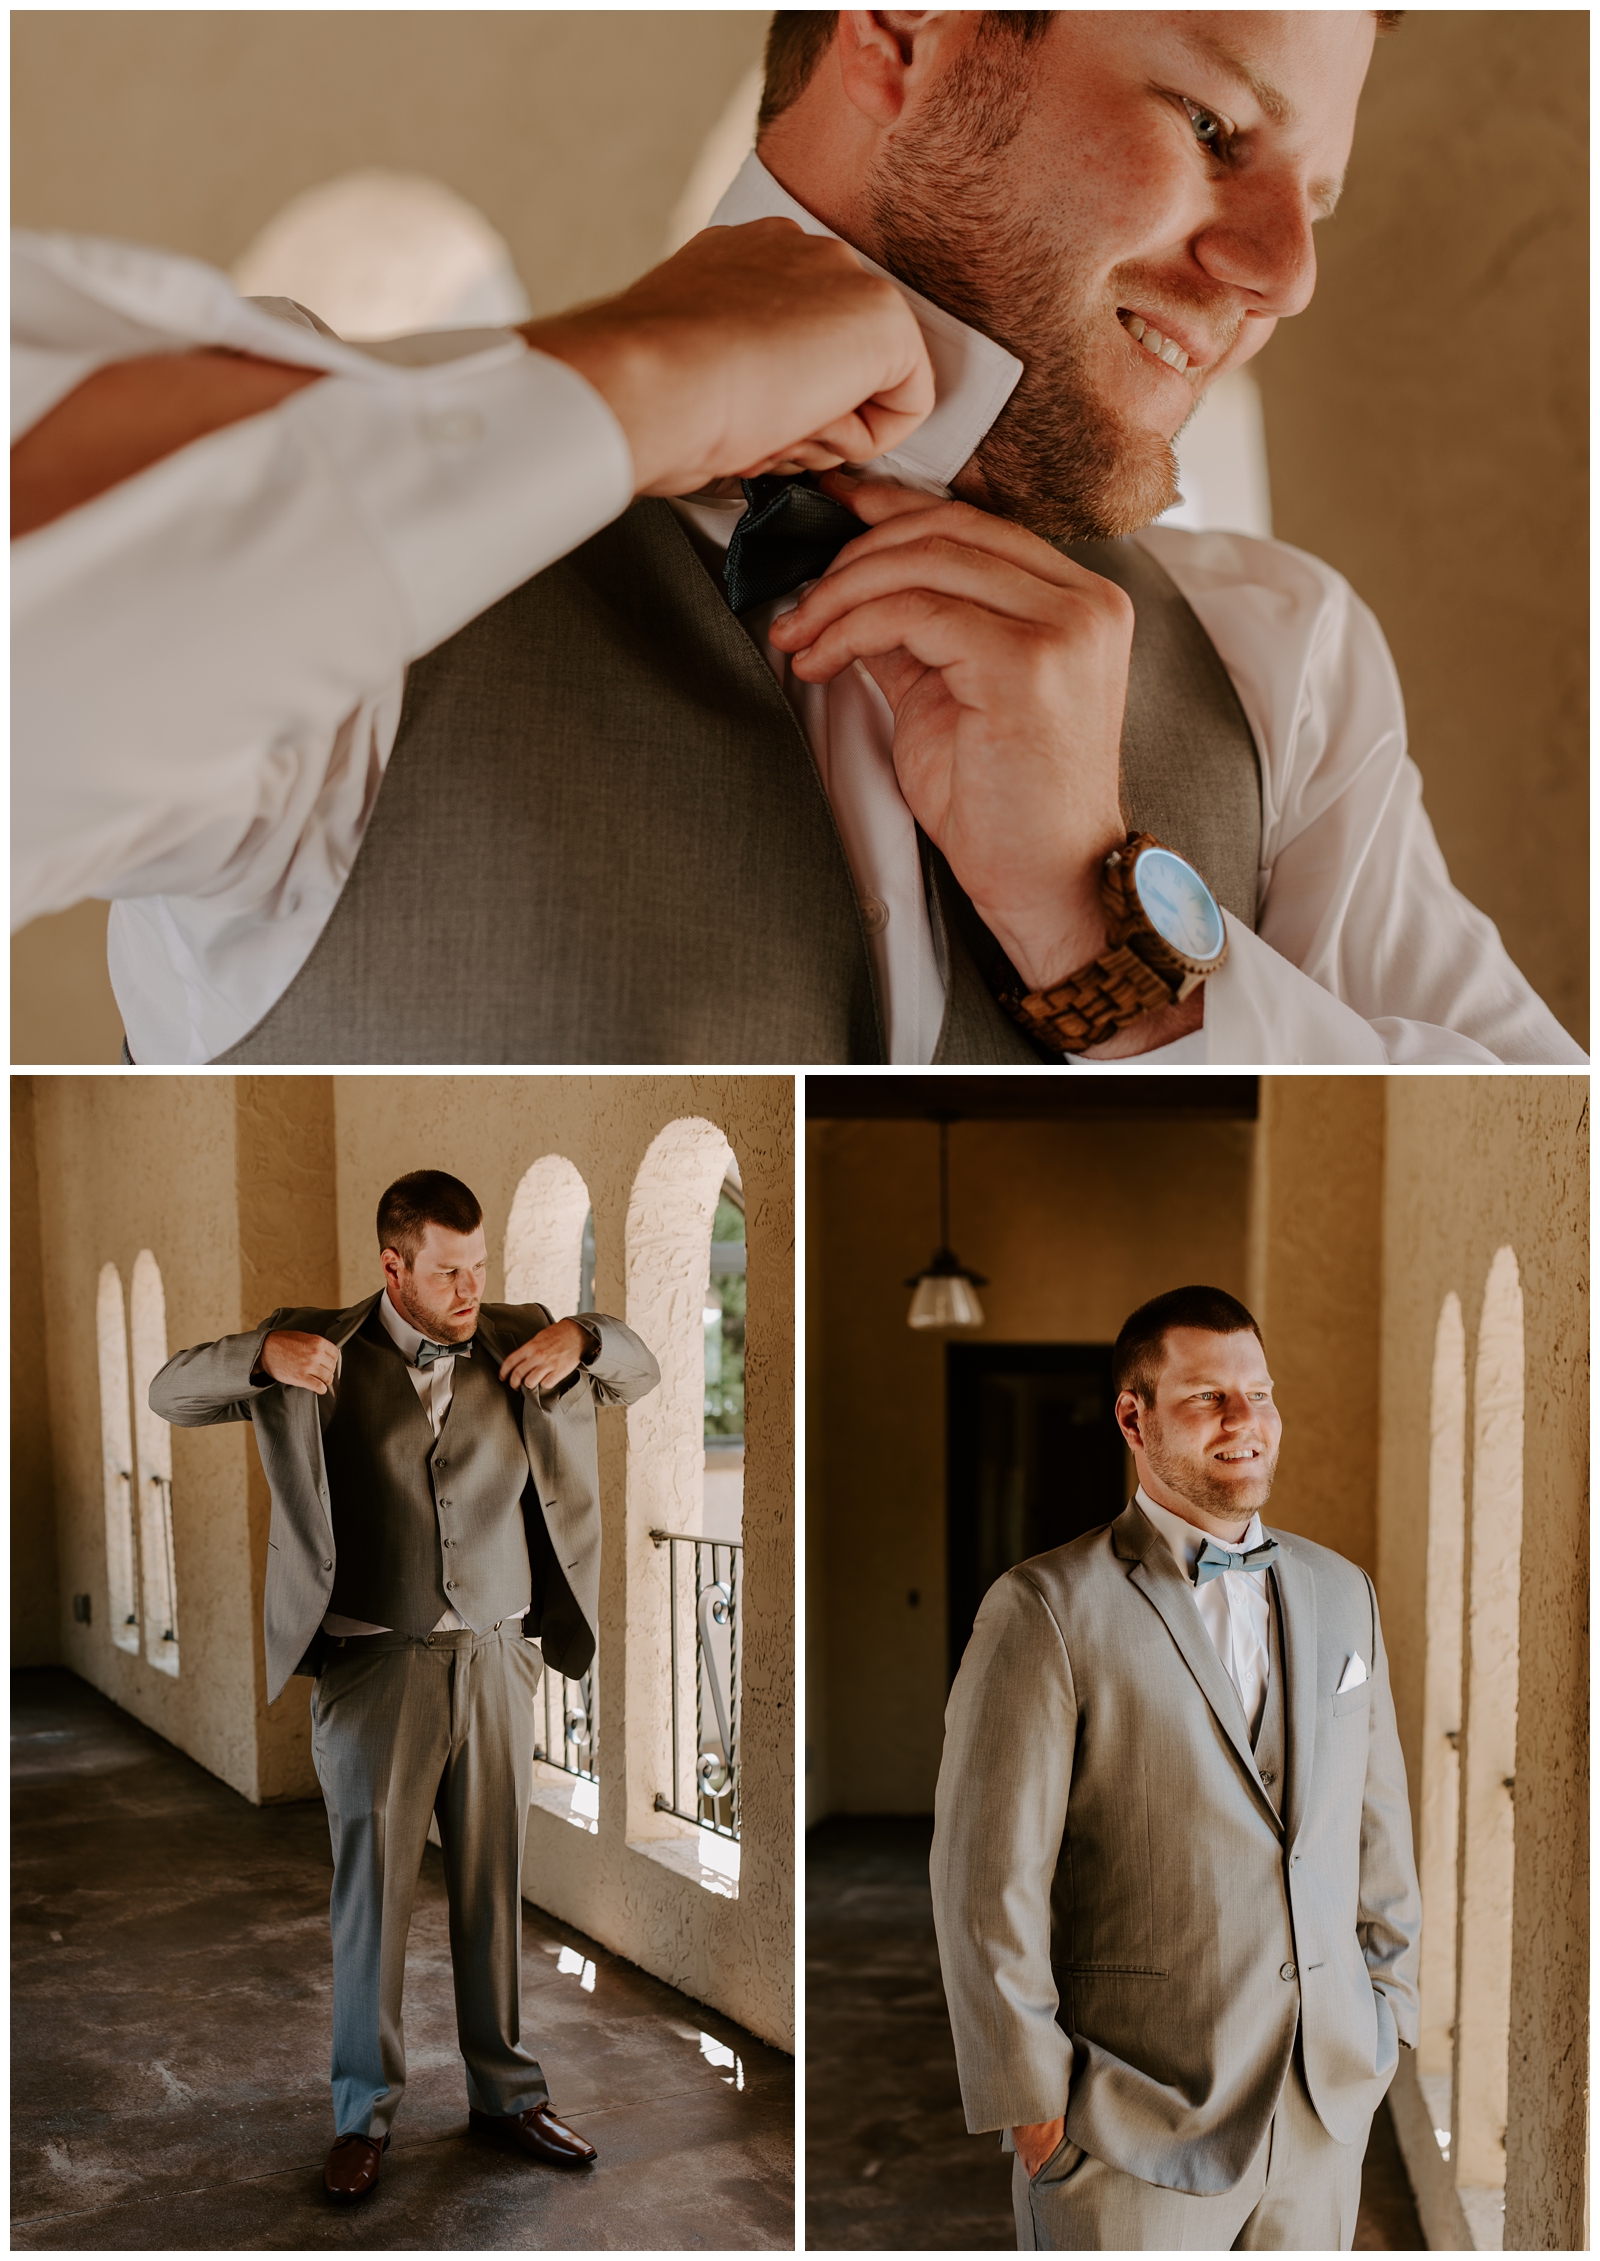 Groom getting ready at Bella Collina for their southern lakeside wedding day - by North Carolina photographer